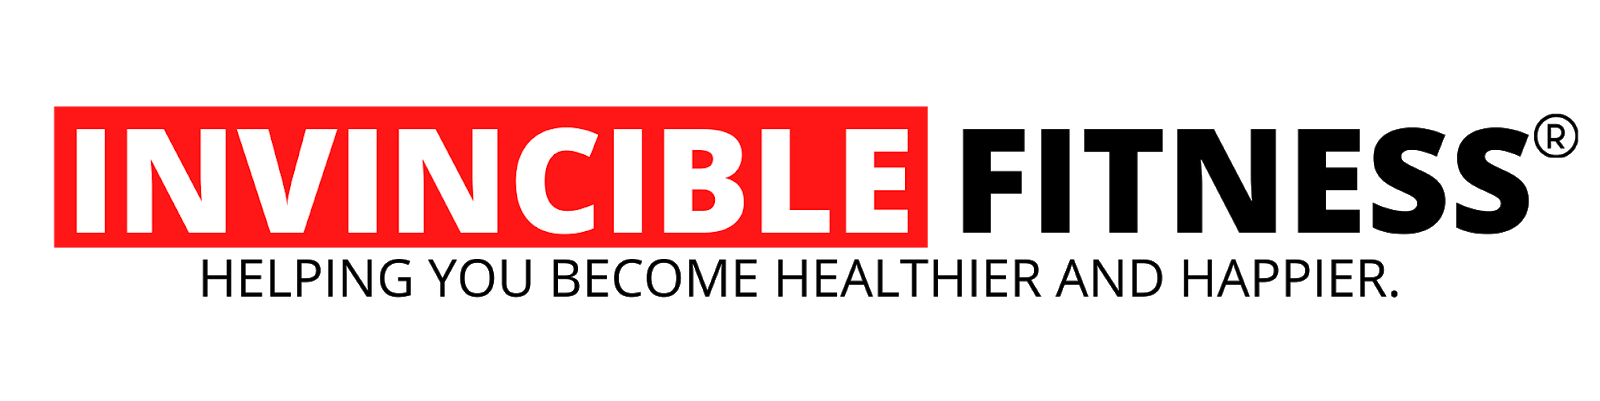 INVINCIBLE FITNESS Franchise Financing